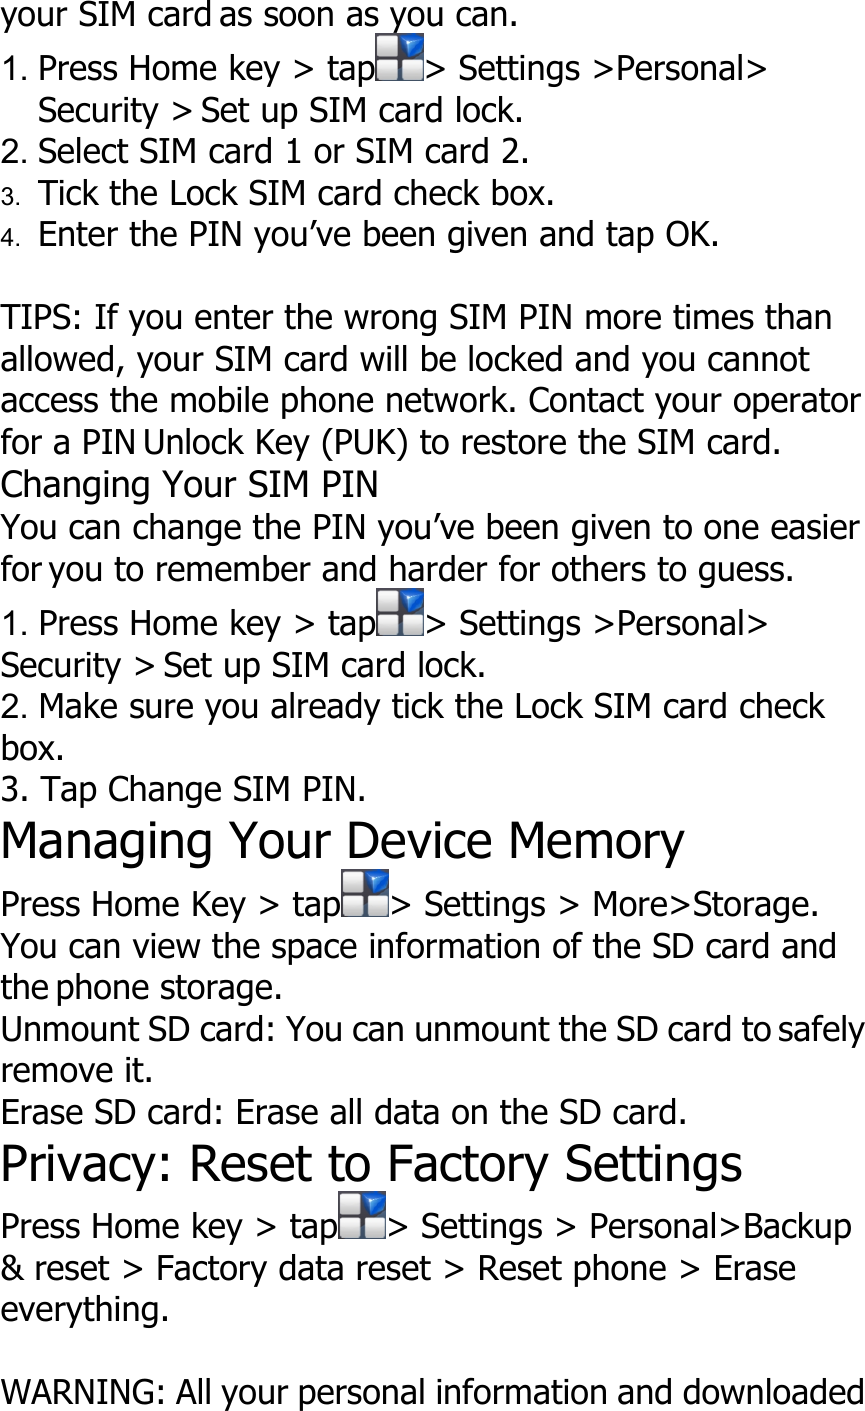 your SIM card as soon as you can.1. Press Home key &gt; tap &gt; Settings &gt;Personal&gt;Security &gt; Set up SIM card lock.2. Select SIM card 1 or SIM card 2.3. Tick the Lock SIM card check box.4. Enter the PIN you’ve been given and tap OK.TIPS: If you enter the wrong SIM PIN more times thanallowed, your SIM card will be locked and you cannotaccess the mobile phone network. Contact your operatorfor a PIN Unlock Key (PUK) to restore the SIM card.Changing Your SIM PINYou can change the PIN you’ve been given to one easierfor you to remember and harder for others to guess.1. Press Home key &gt; tap &gt; Settings &gt;Personal&gt;Security &gt; Set up SIM card lock.2. Make sure you already tick the Lock SIM card checkbox.3. Tap Change SIM PIN.Managing Your Device MemoryPress Home Key &gt; tap &gt; Settings &gt; More&gt;Storage.You can view the space information of the SD card andthe phone storage.Unmount SD card: You can unmount the SD card to safelyremove it.Erase SD card: Erase all data on the SD card.Privacy: Reset to Factory SettingsPress Home key &gt; tap &gt; Settings &gt; Personal&gt;Backup&amp; reset &gt; Factory data reset &gt; Reset phone &gt; Eraseeverything.WARNING: All your personal information and downloaded